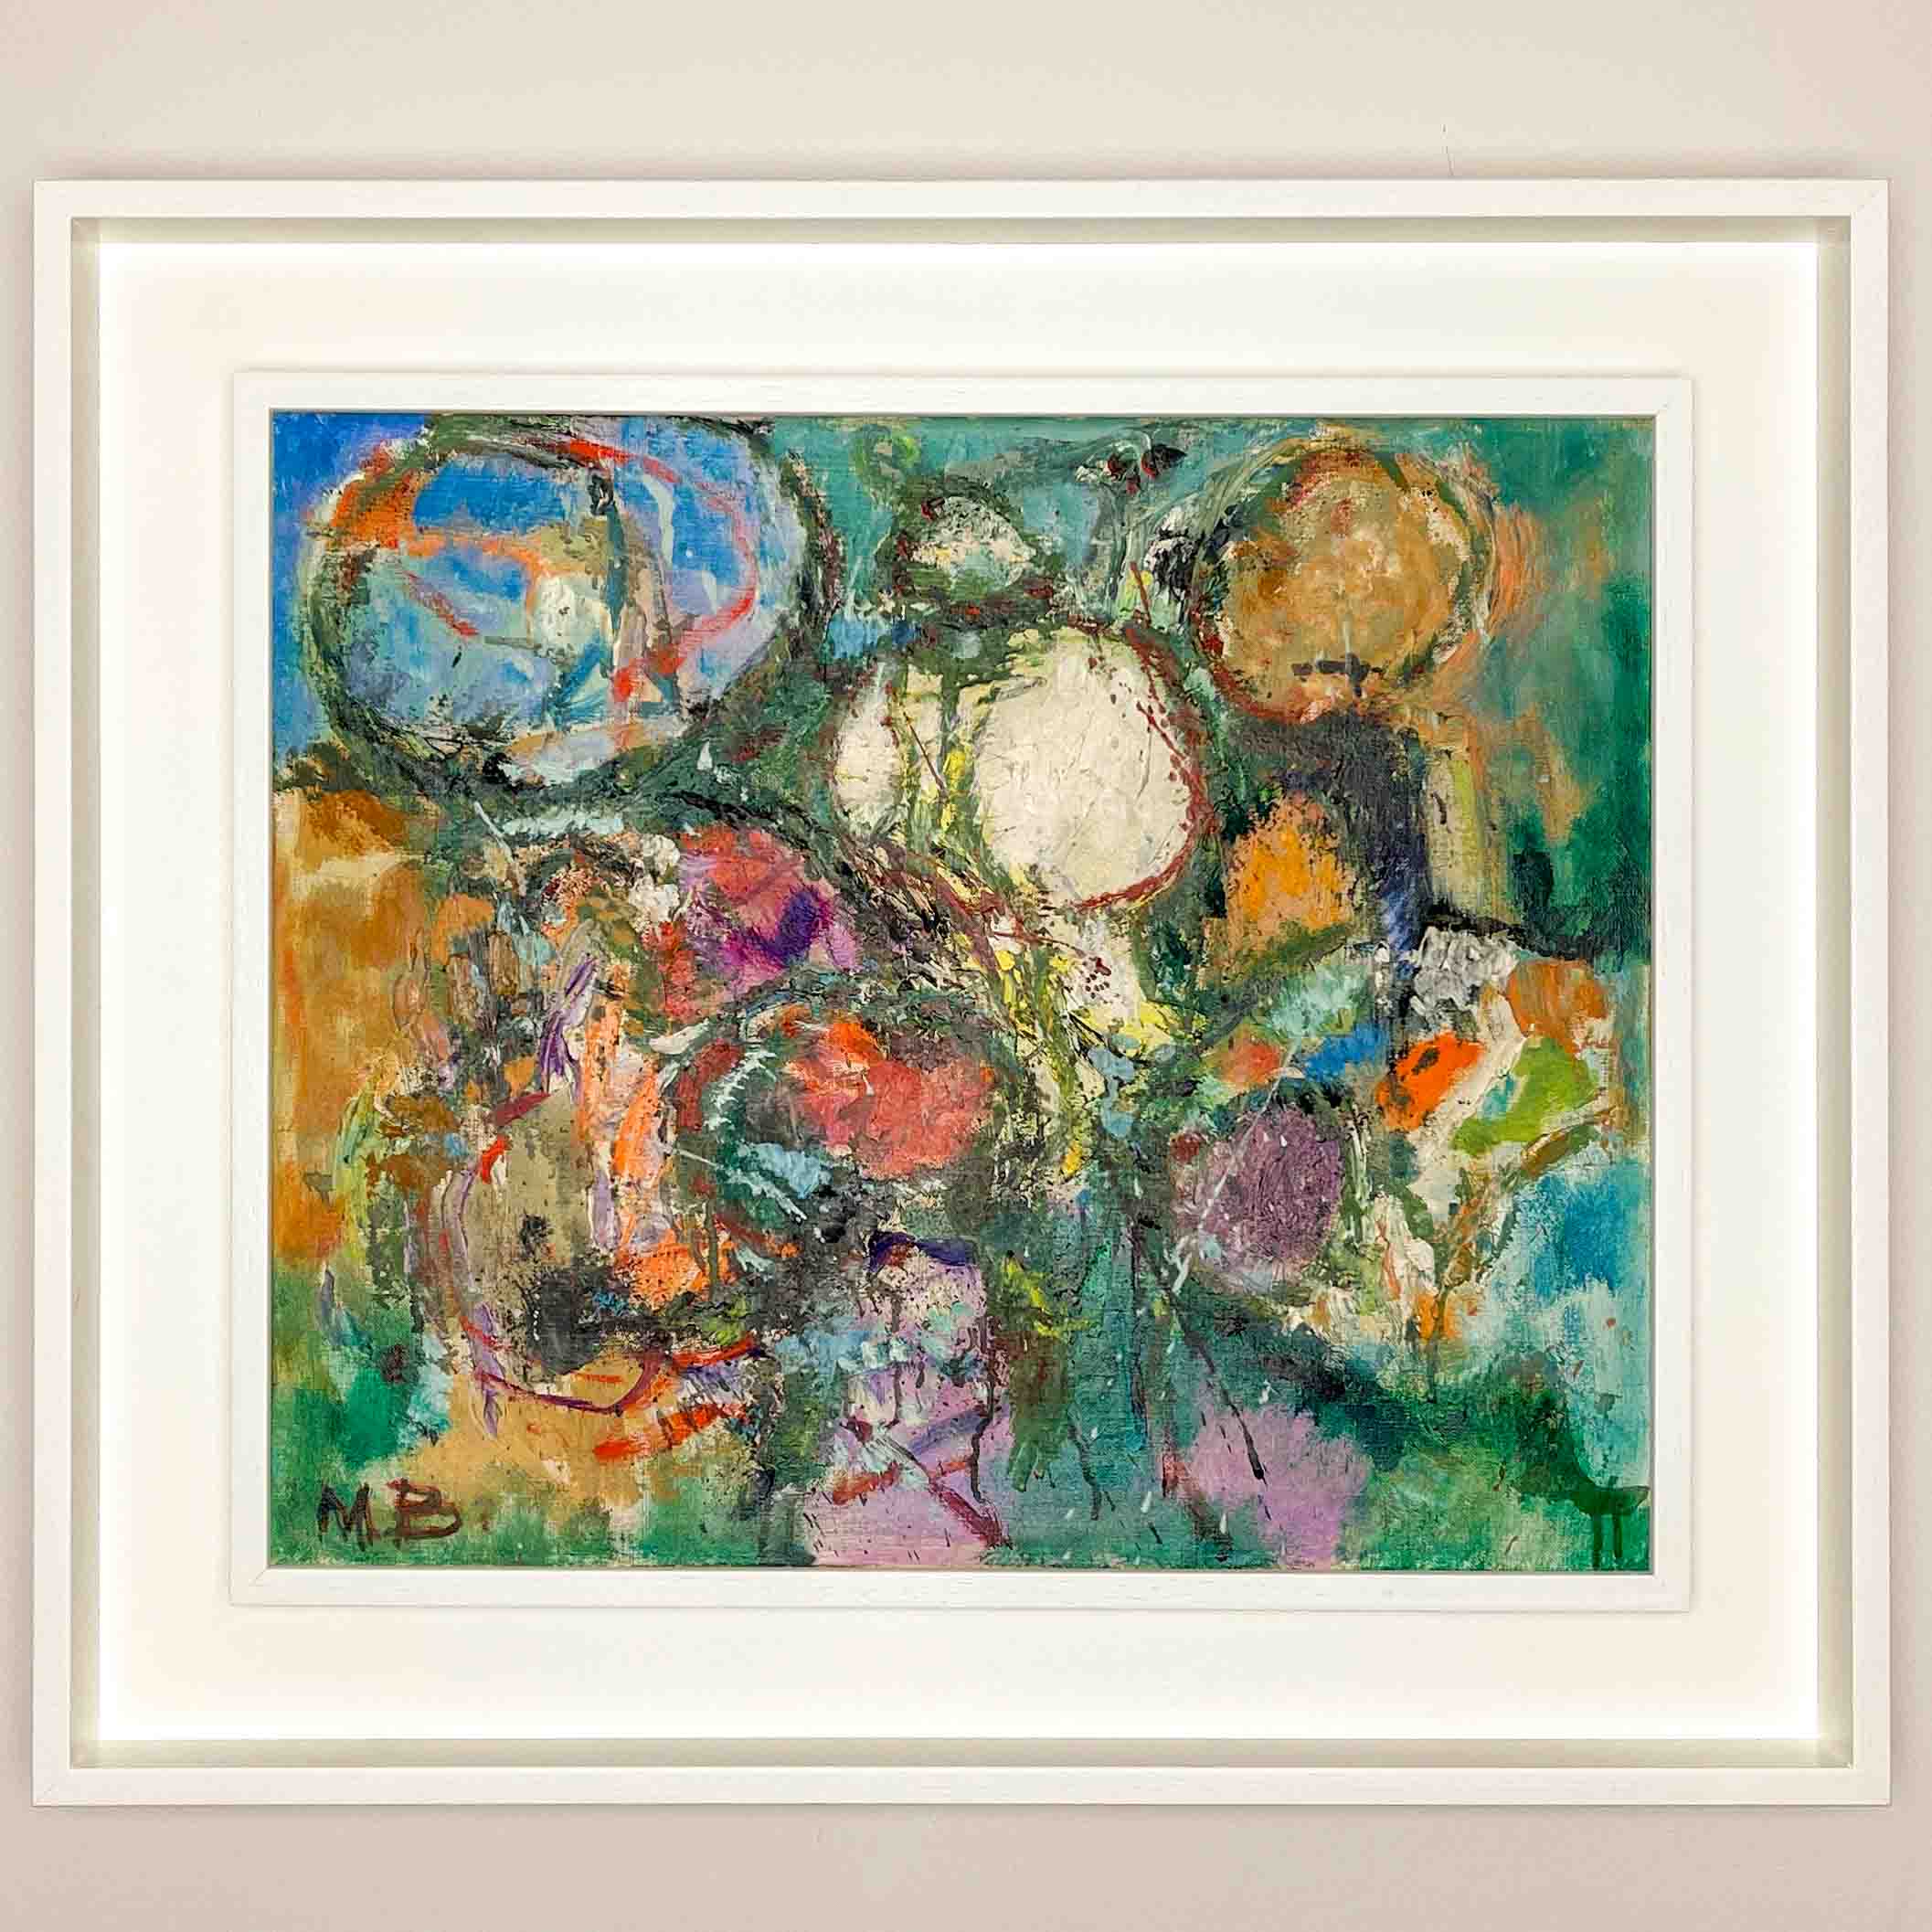 Mogens Balle - Composition (Figures), circa 1965 - oil on canvas, professionally framed